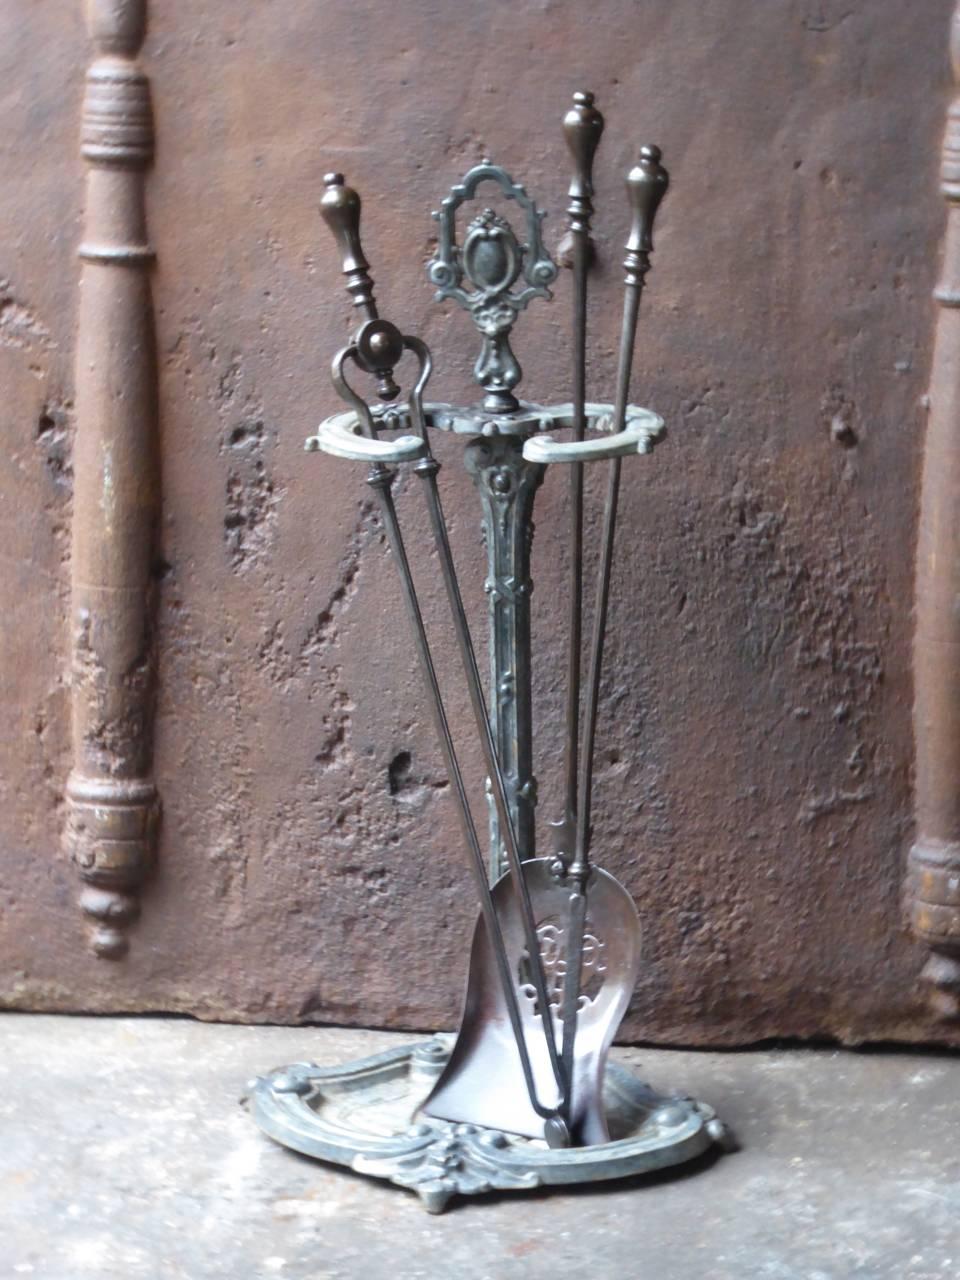 19th century English fireplace tool set - fire irons made of cast iron and wrought iron.

We have a unique and specialized collection of antique and used fireplace accessories consisting of more than 1000 listings at 1stdibs. Amongst others, we